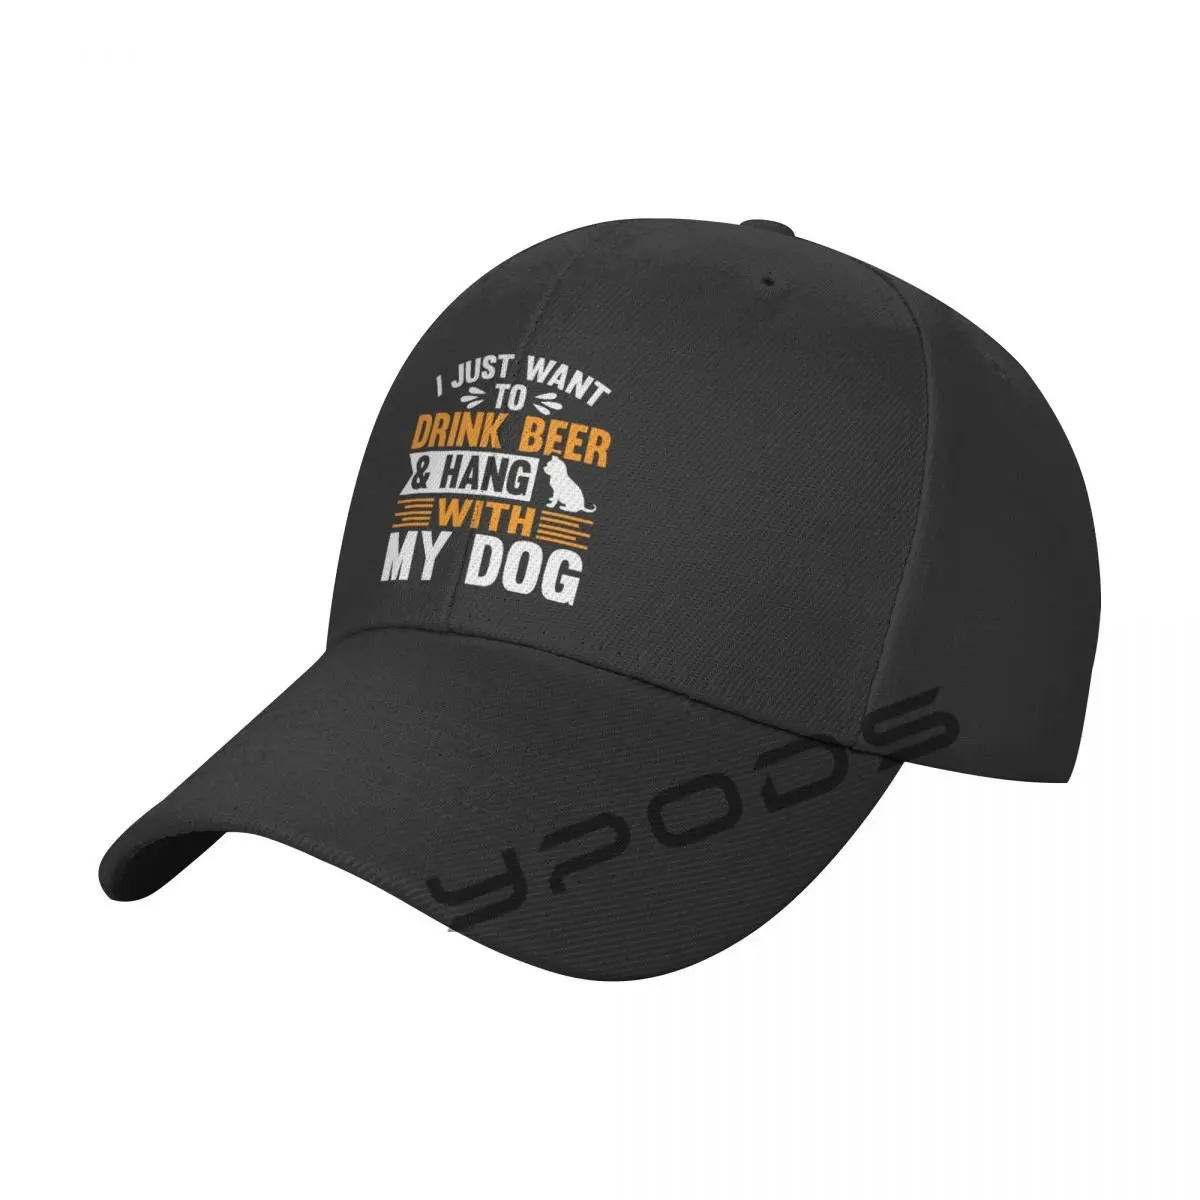 

I Just Want To Drink-Beer And Hang With My Dog Men's Classic Baseball Cap Adjustable Buckle Closure Dad Hat Sports Cap